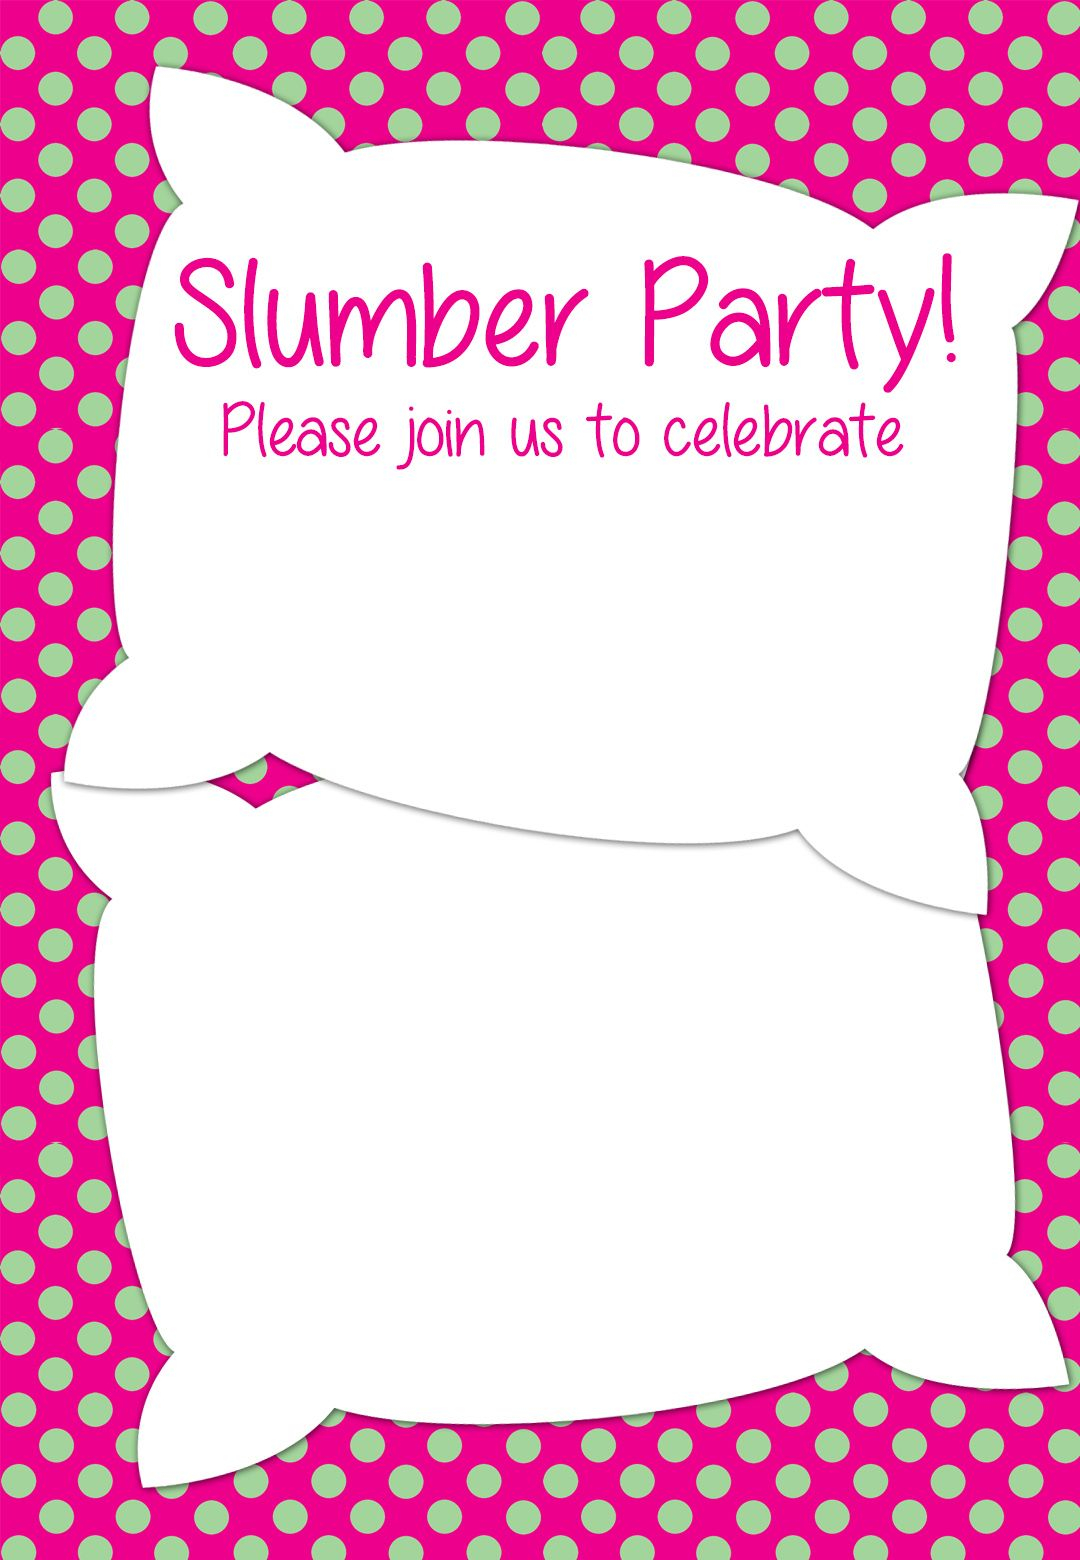 Free Printable Slumber Party Invitation Party Ideas In 2019 intended for proportions 1080 X 1560